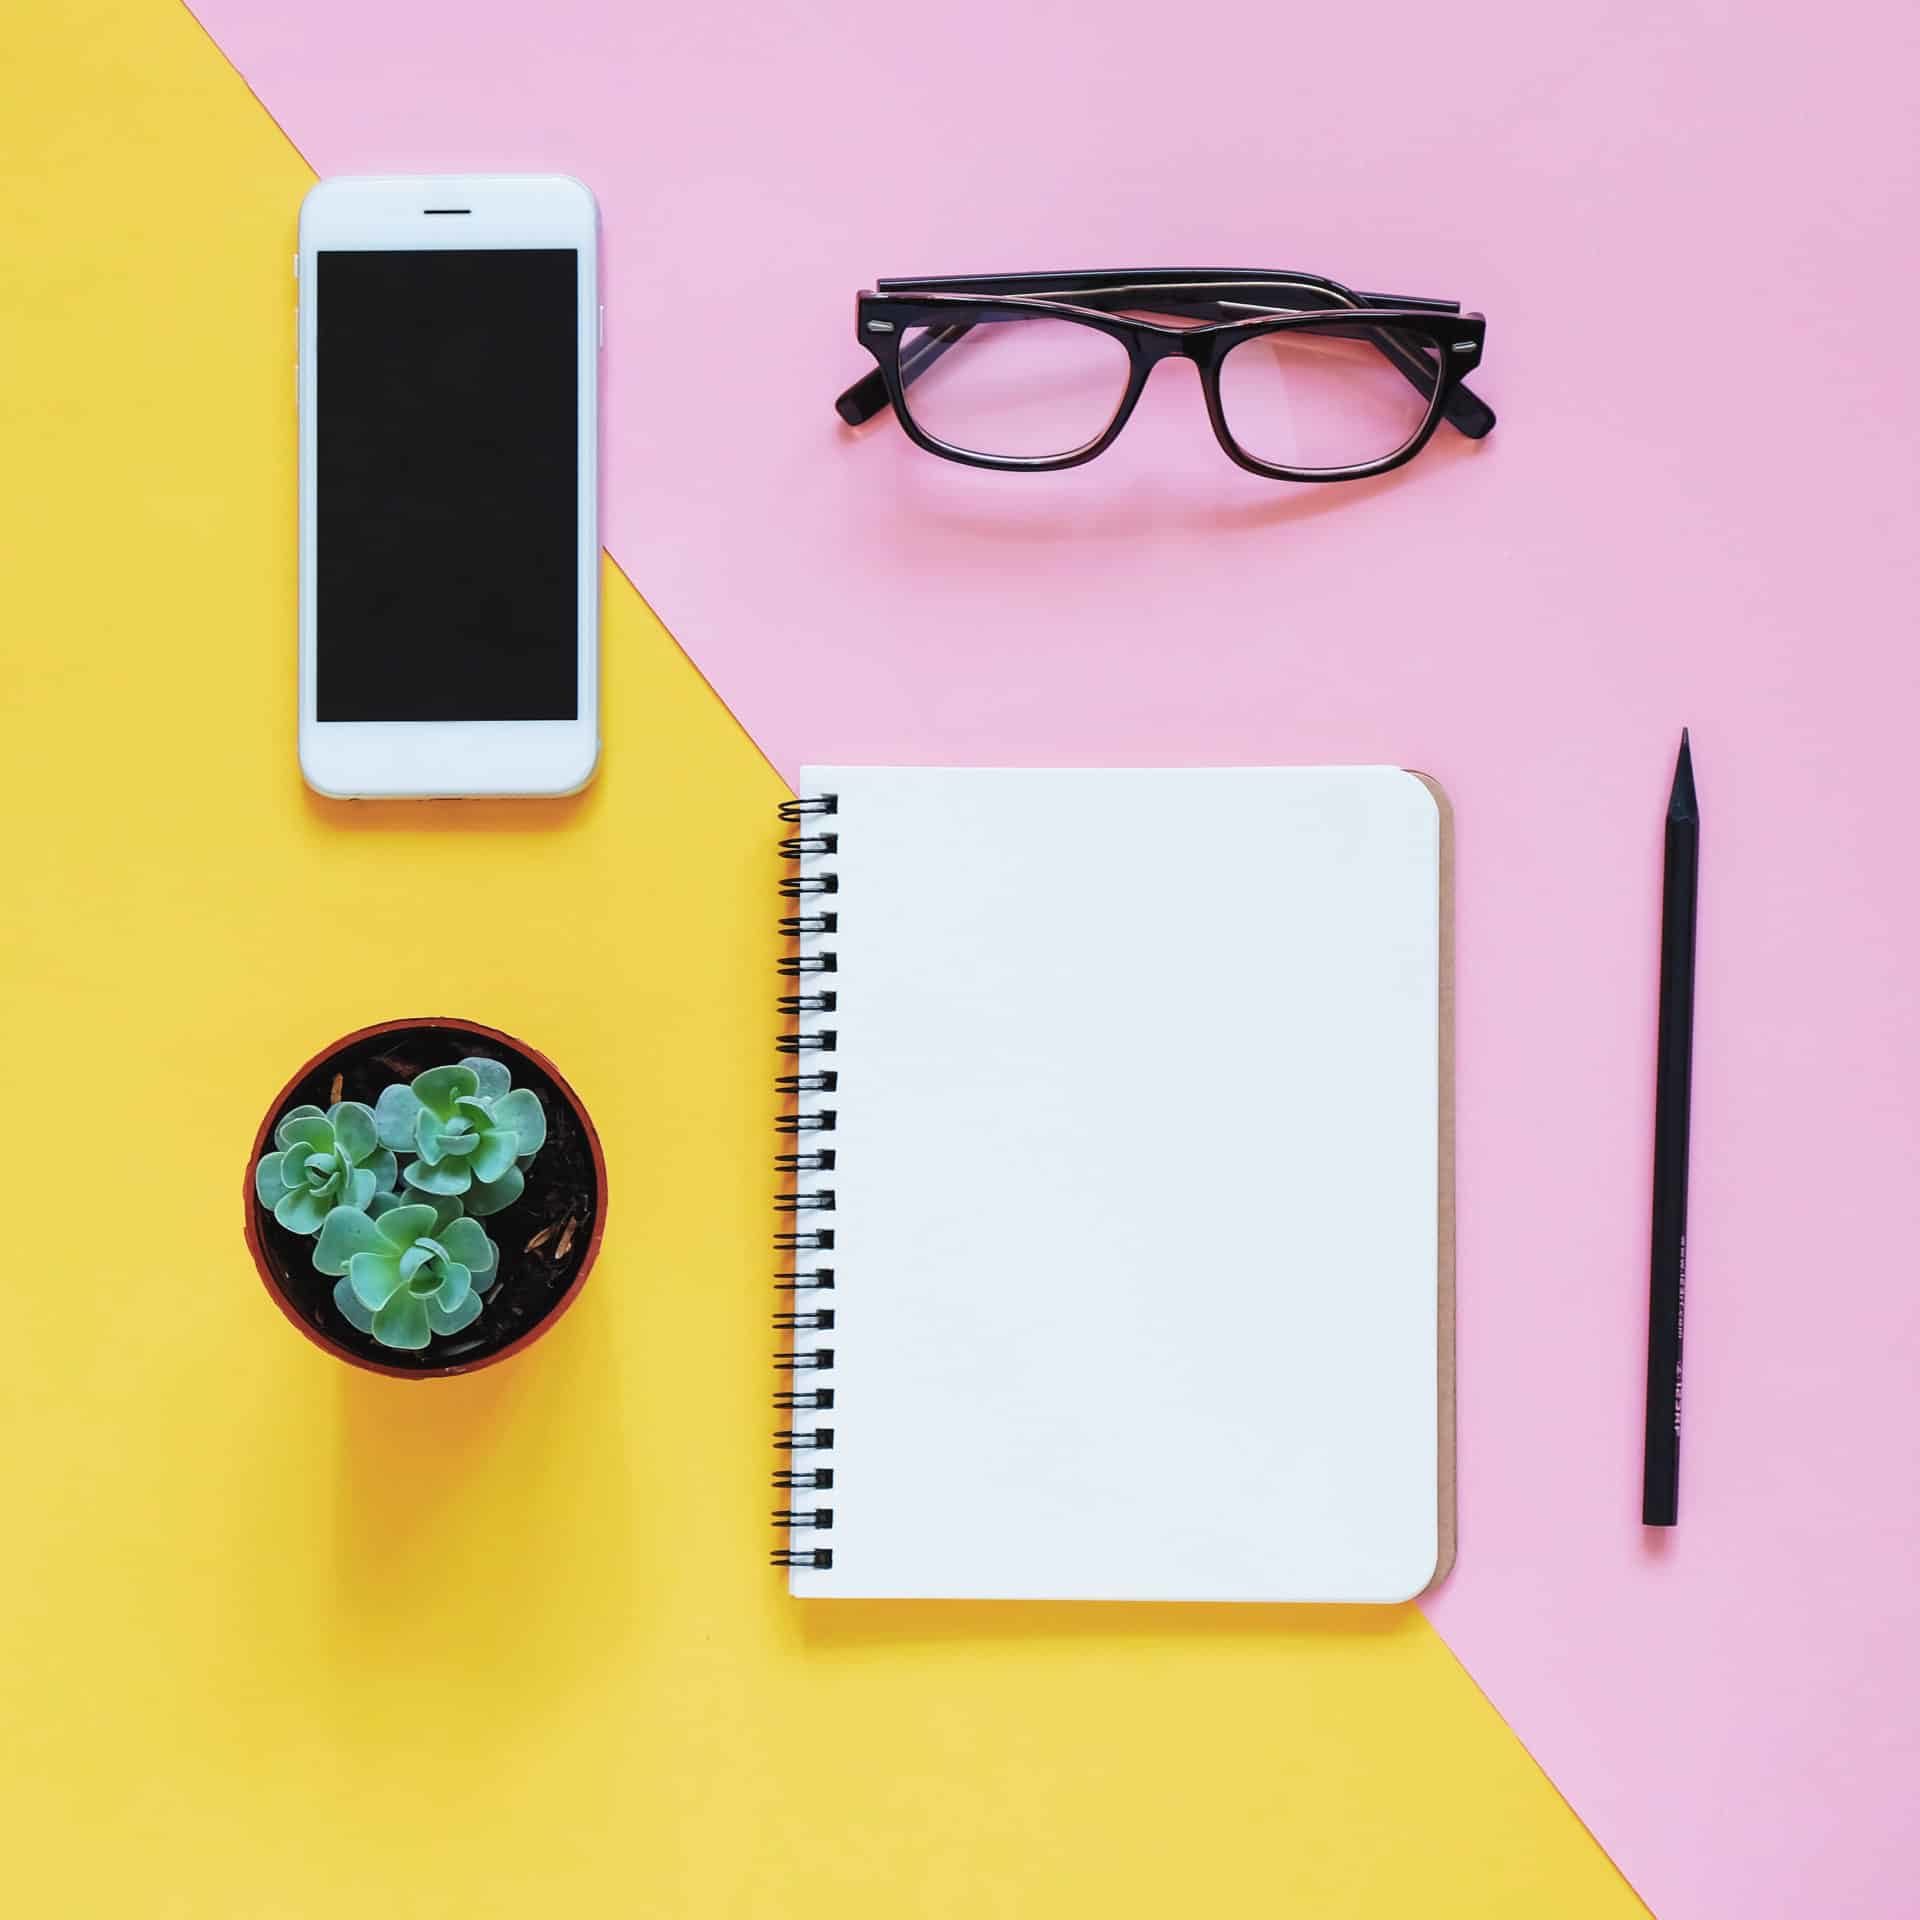 Creative flat lay photo of workspace desk with smartphone, eyeglasses, cactus and notebook with copy space background, minimal style